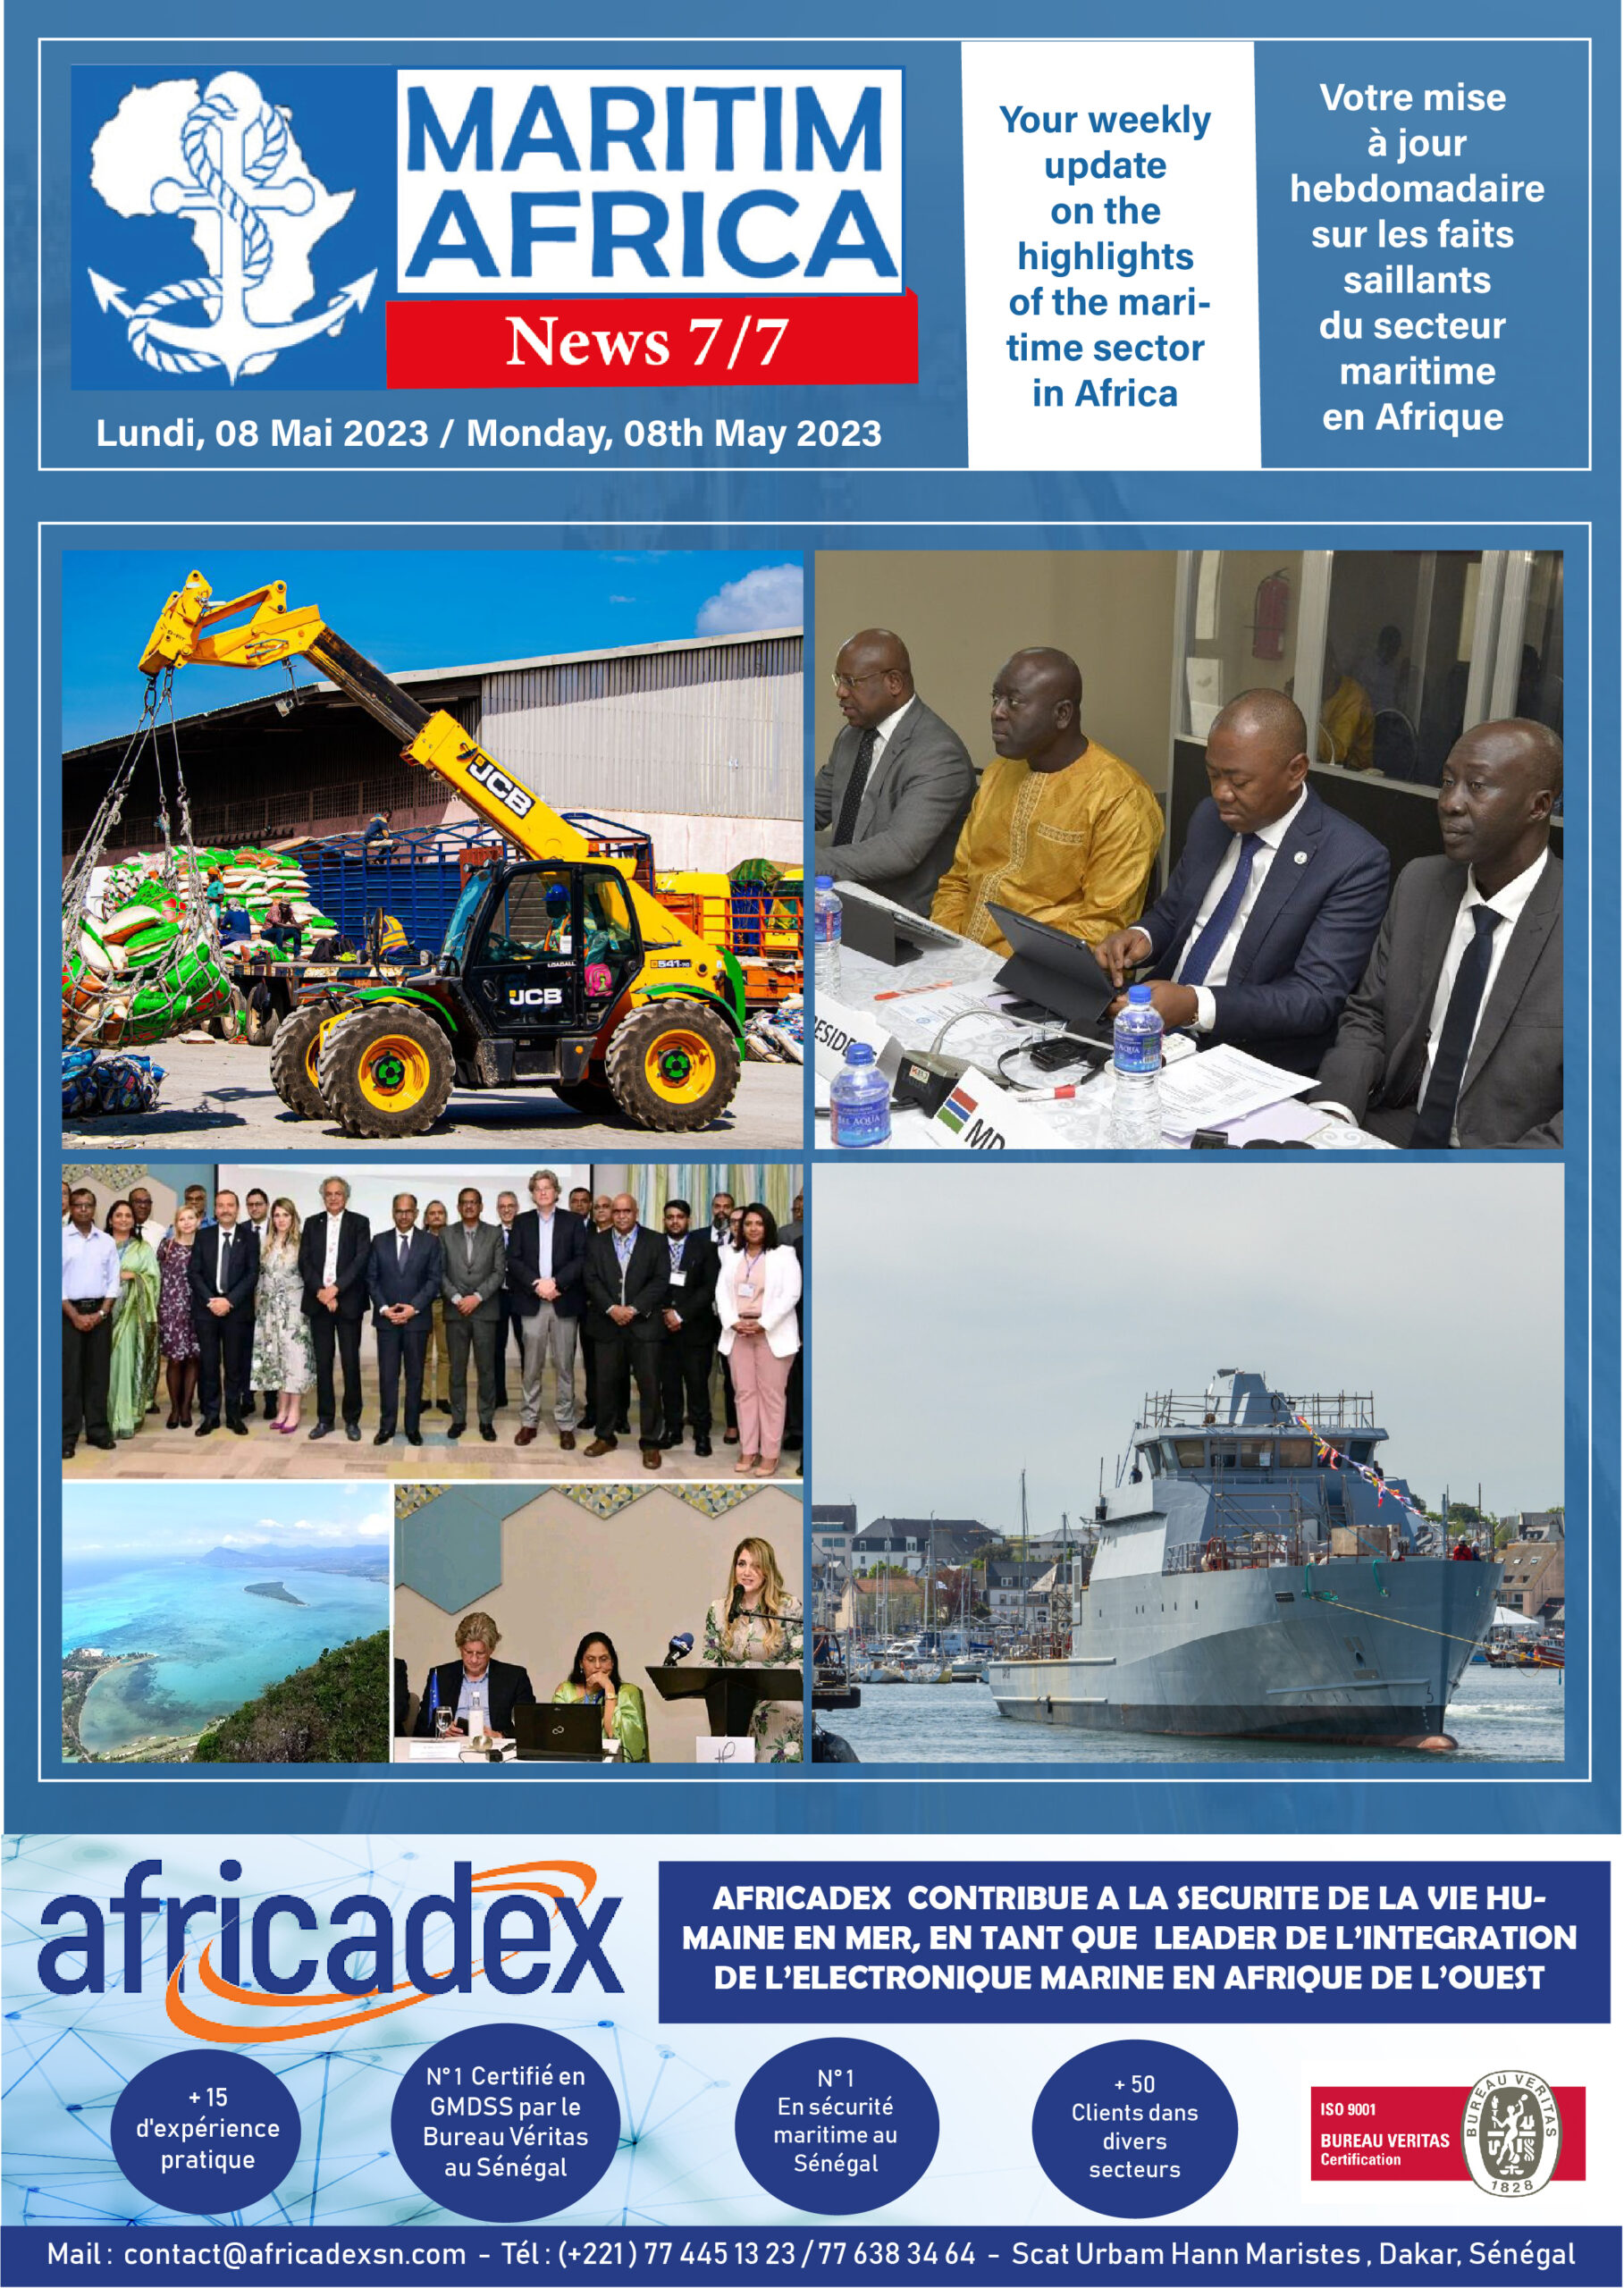 Maritimafrica News 7/7 (Week of 1st – 7th may 2023)